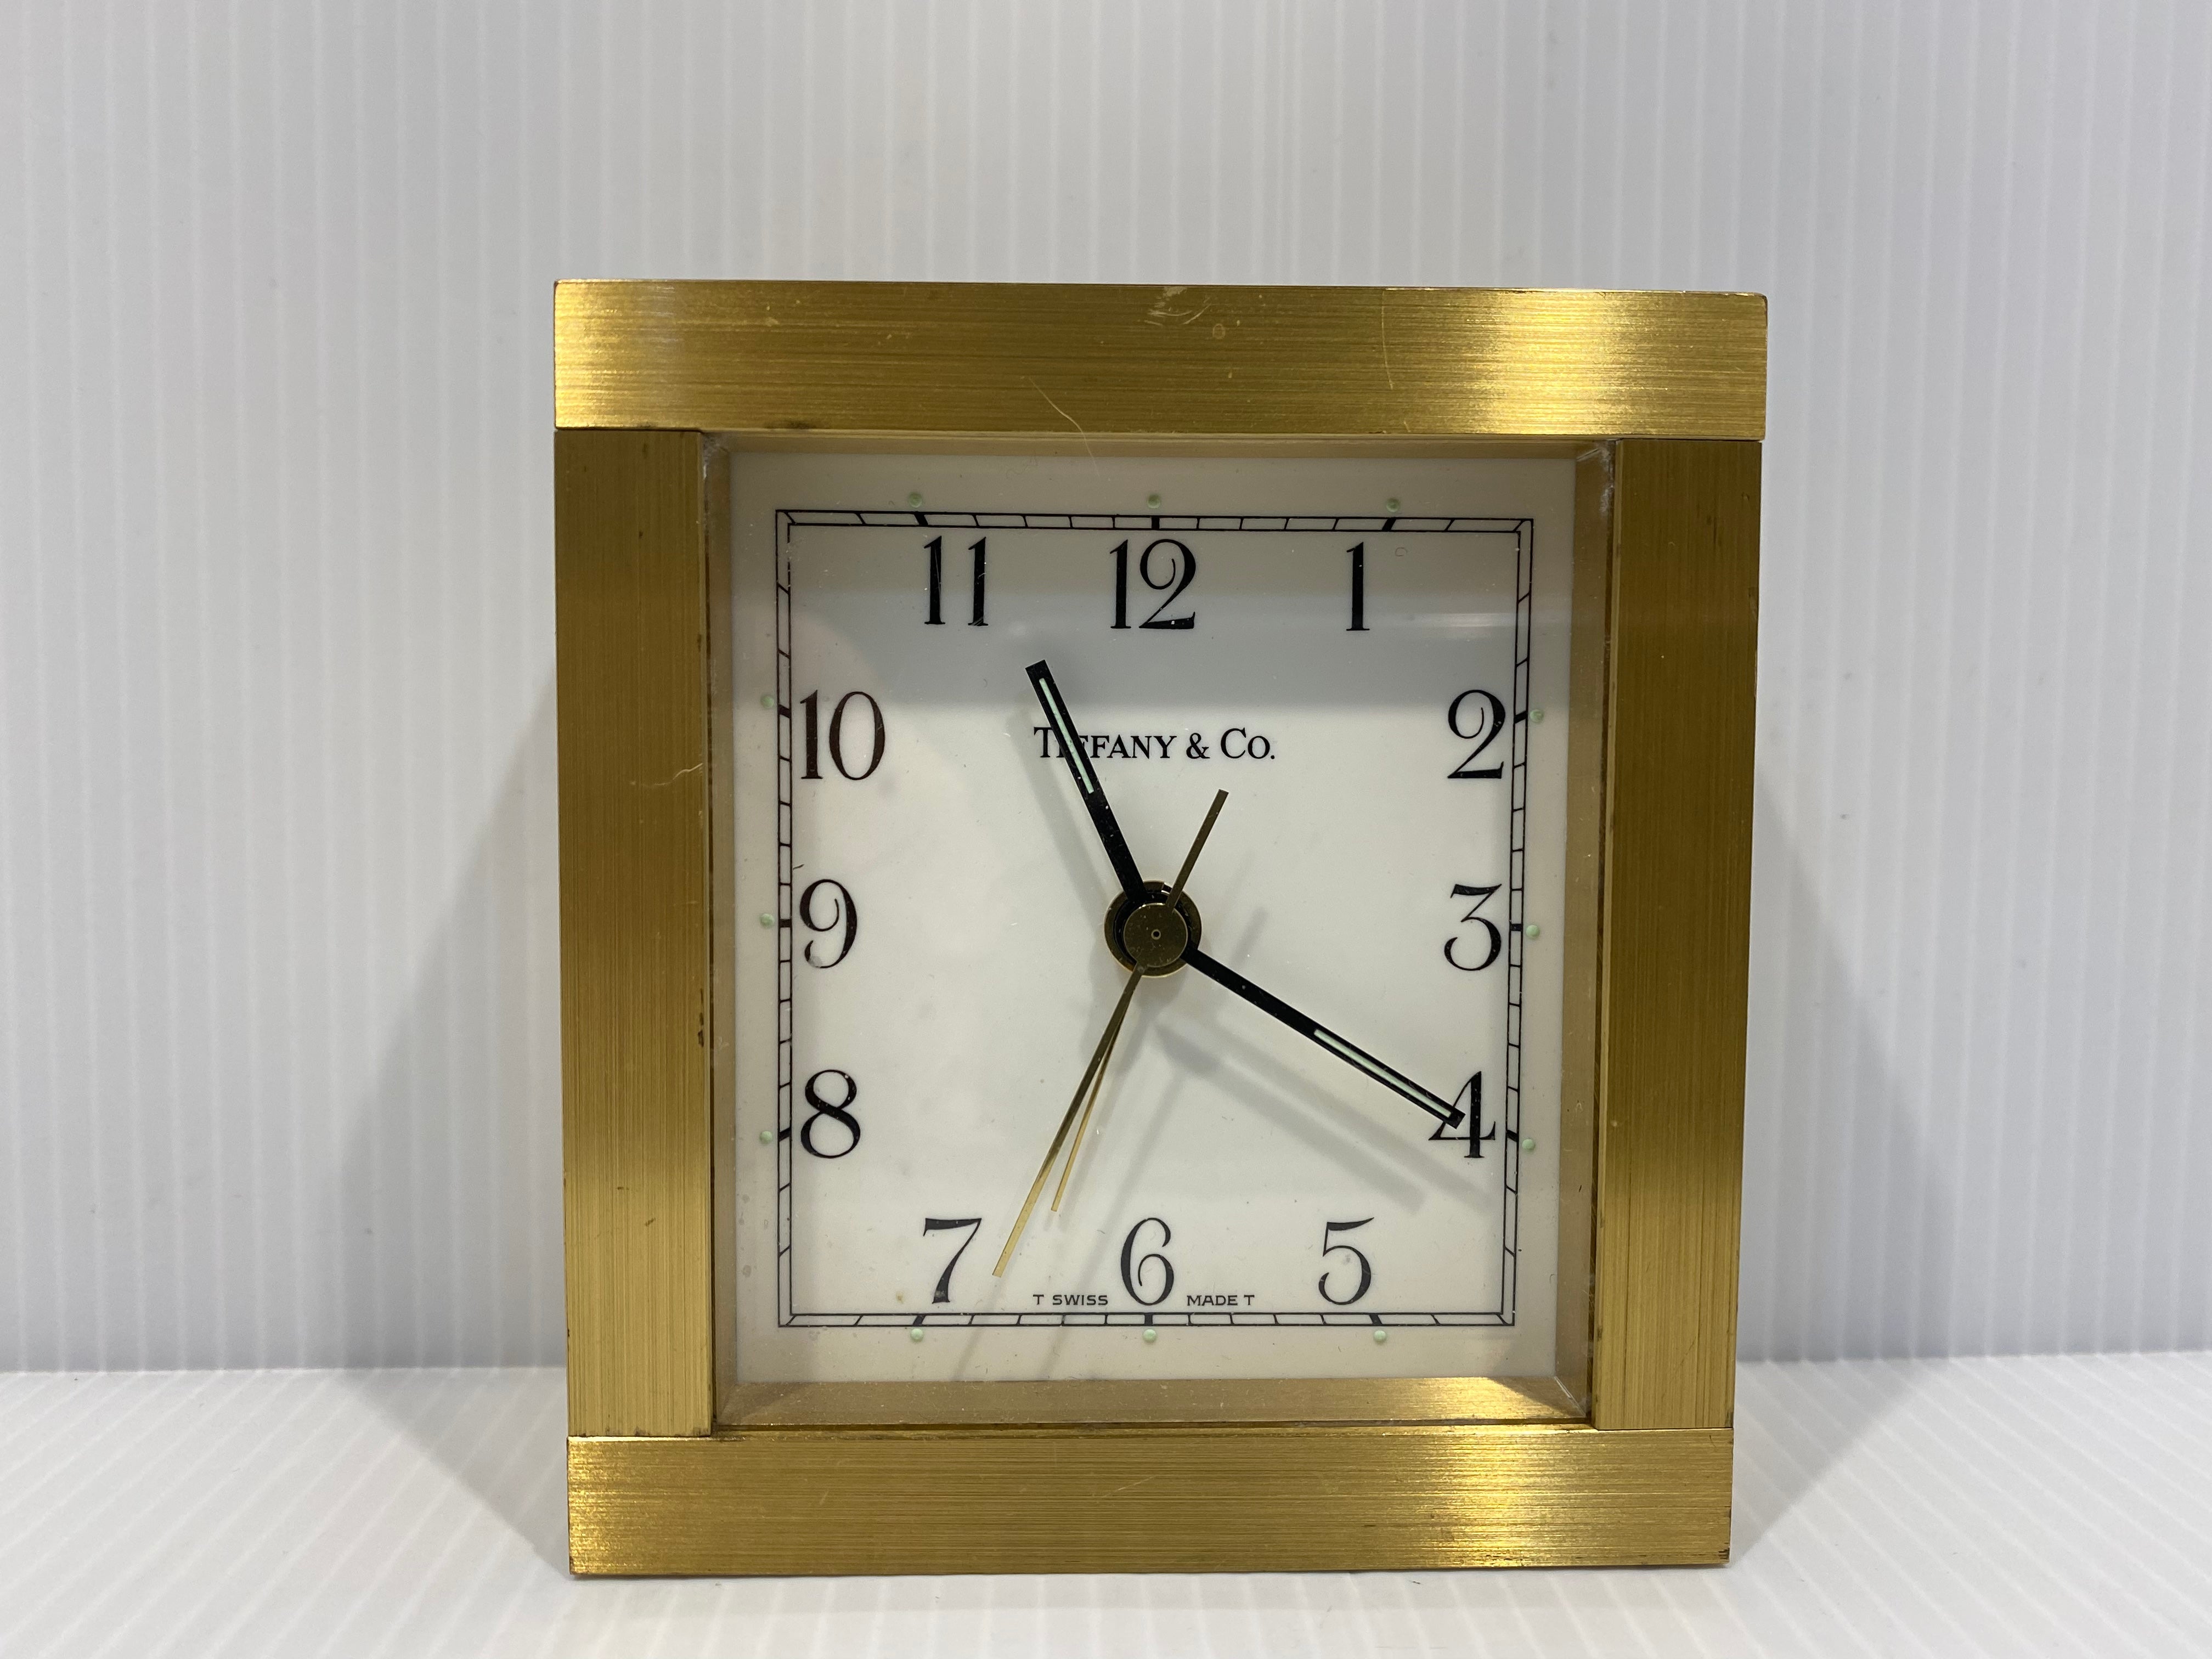 Tiffany & Co. Machined Bronze or Brass Square Mantel Desk Clock With Alarm